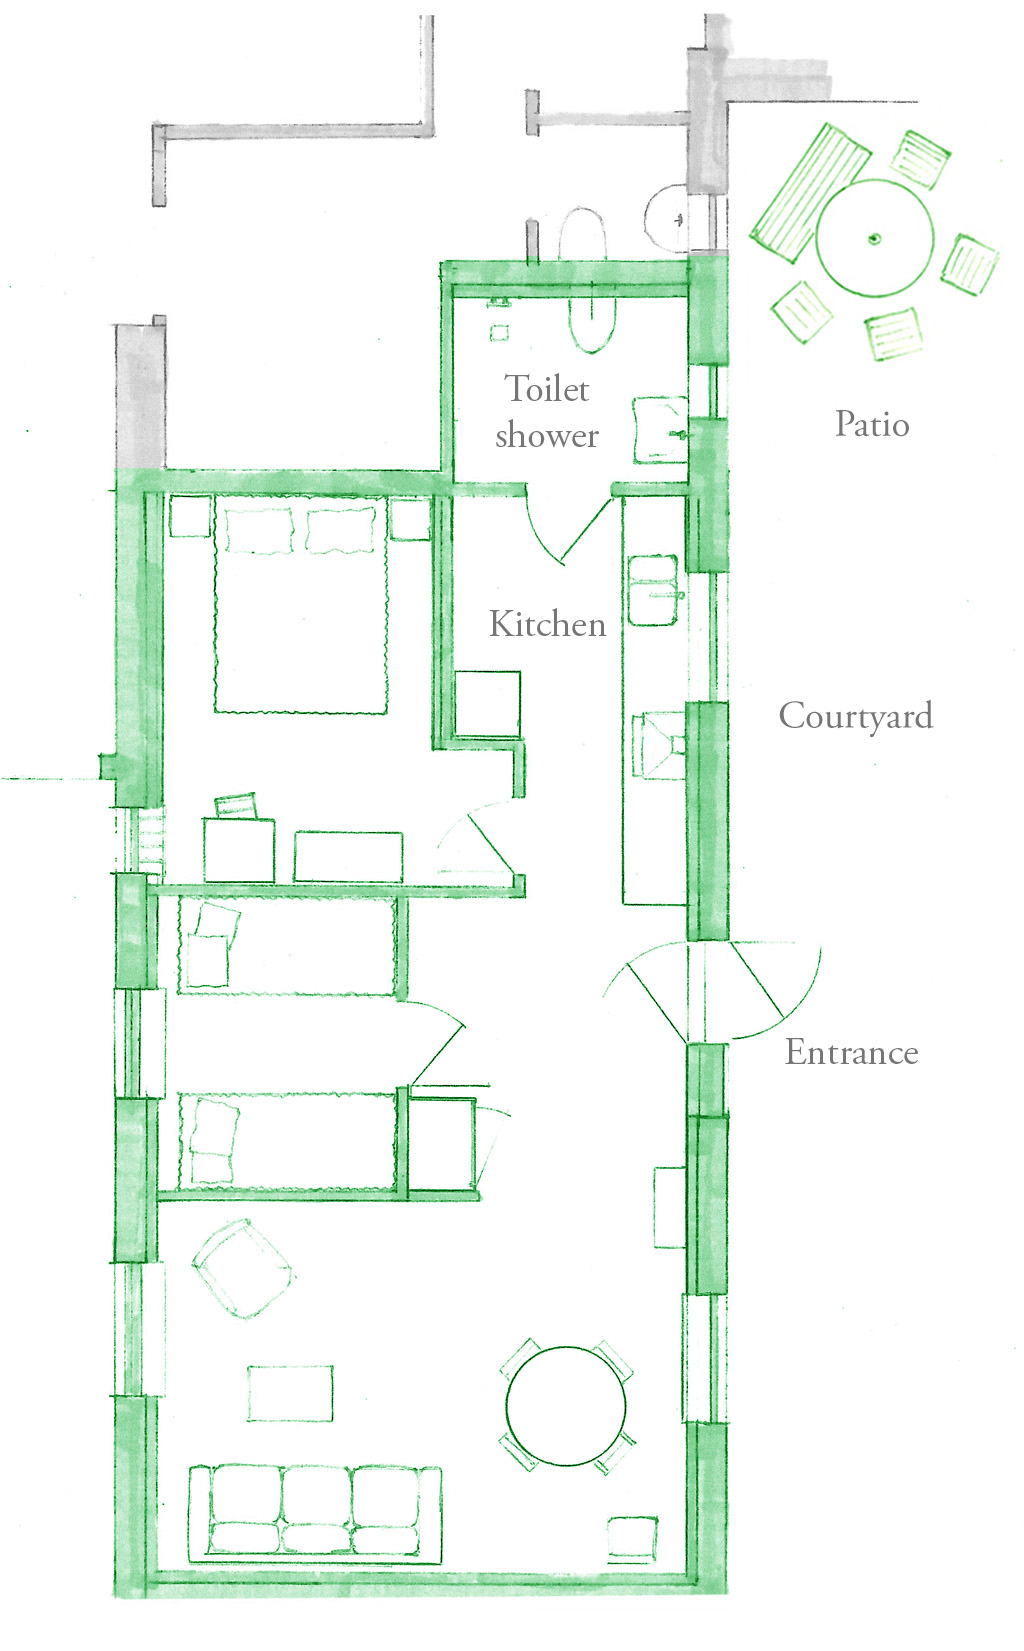 Interior planning for the small courtyard apartment.